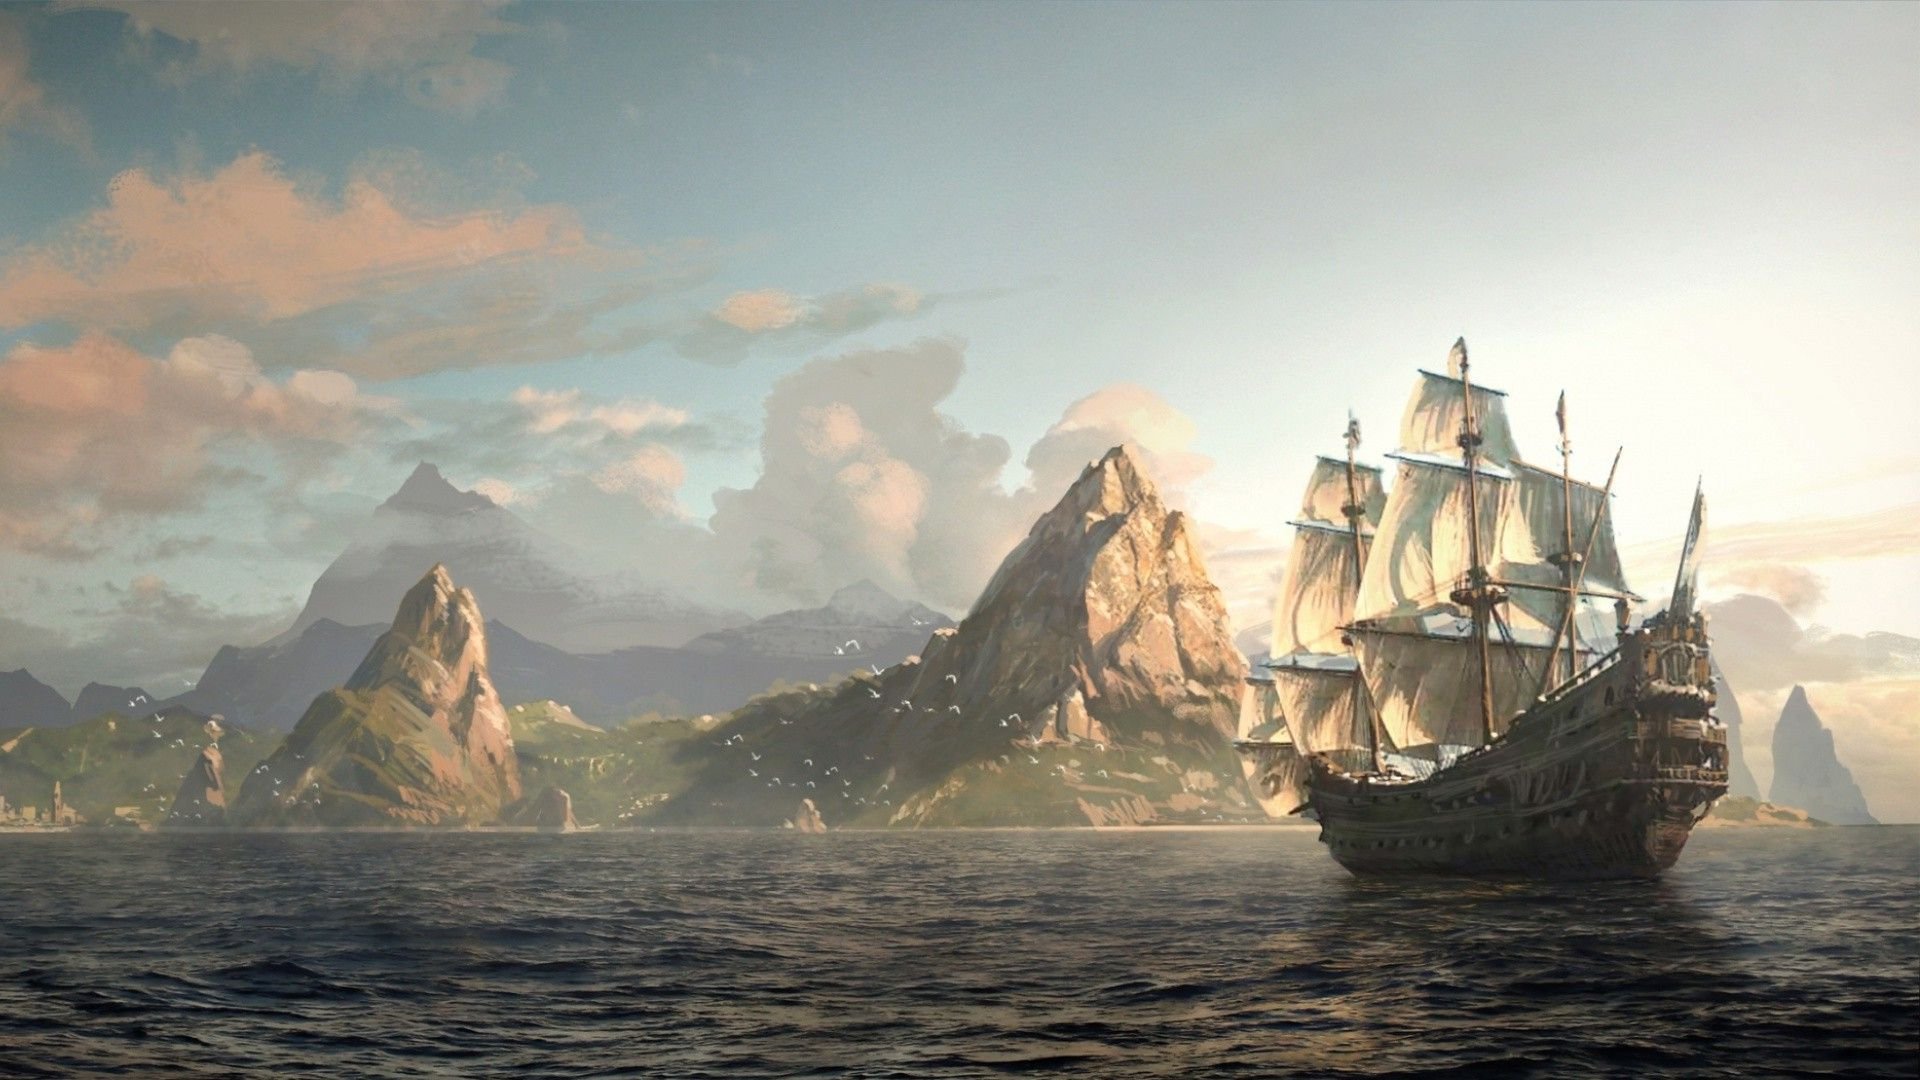 Sea Pirate Wallpapers  HD Wallpapers  ID 13382